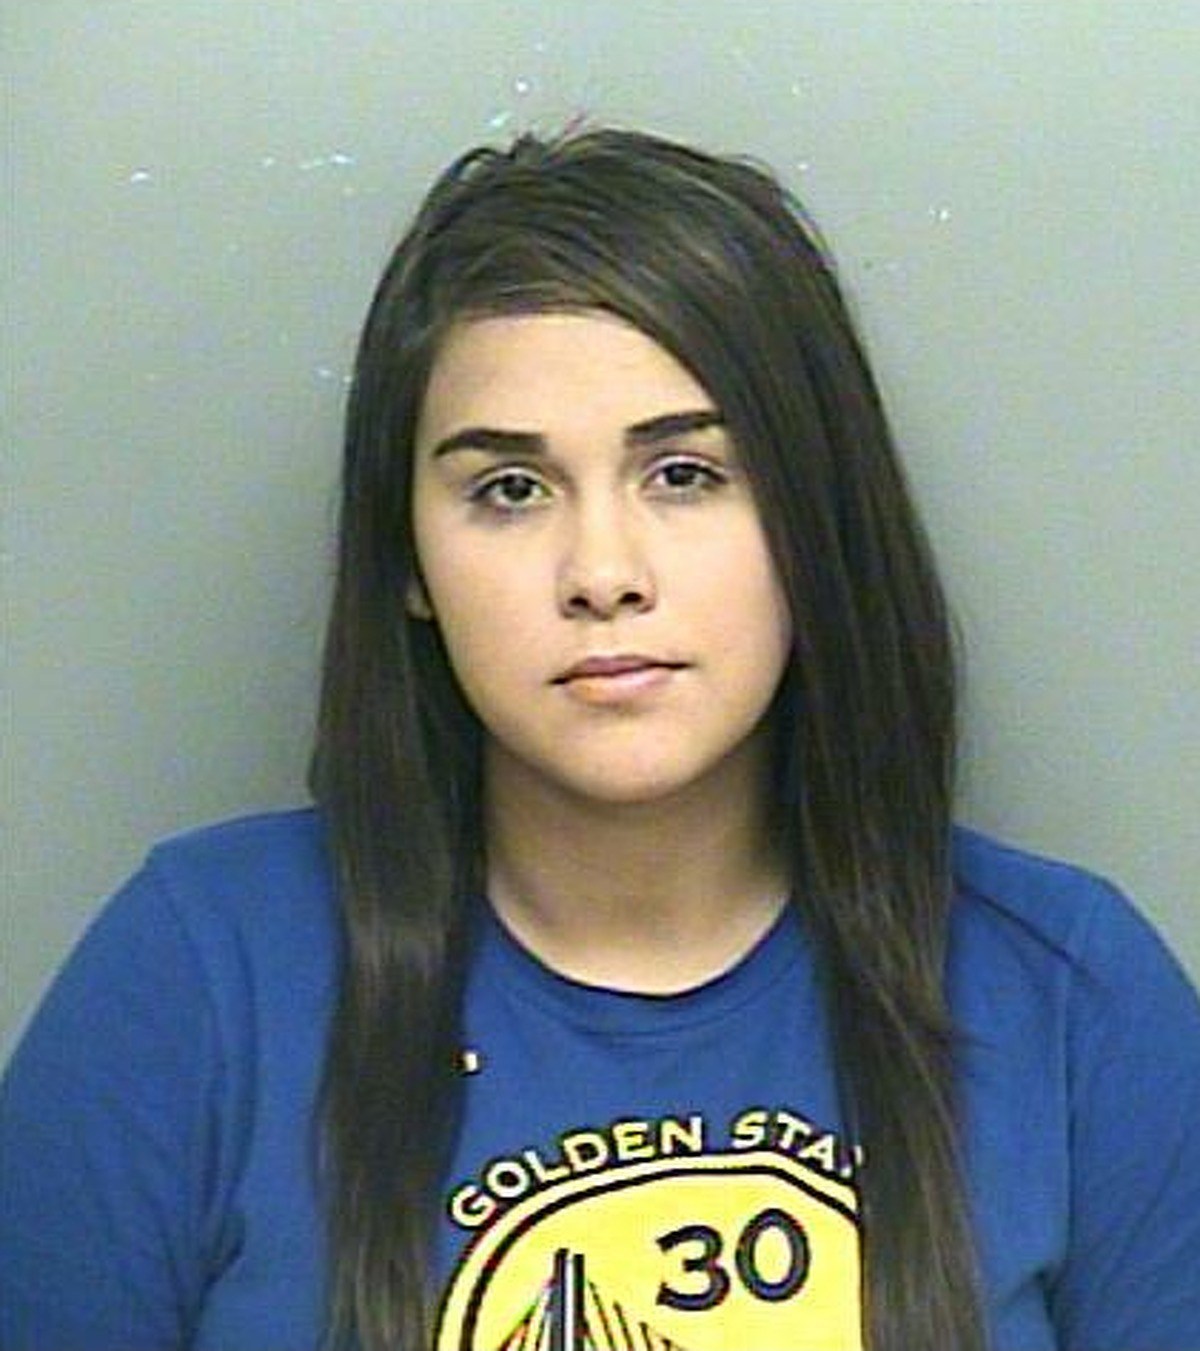 8th Grade Sex Porn - Police: West Texas teacher told student he cuts off sexual relationships  'at 8th graders... LOL'